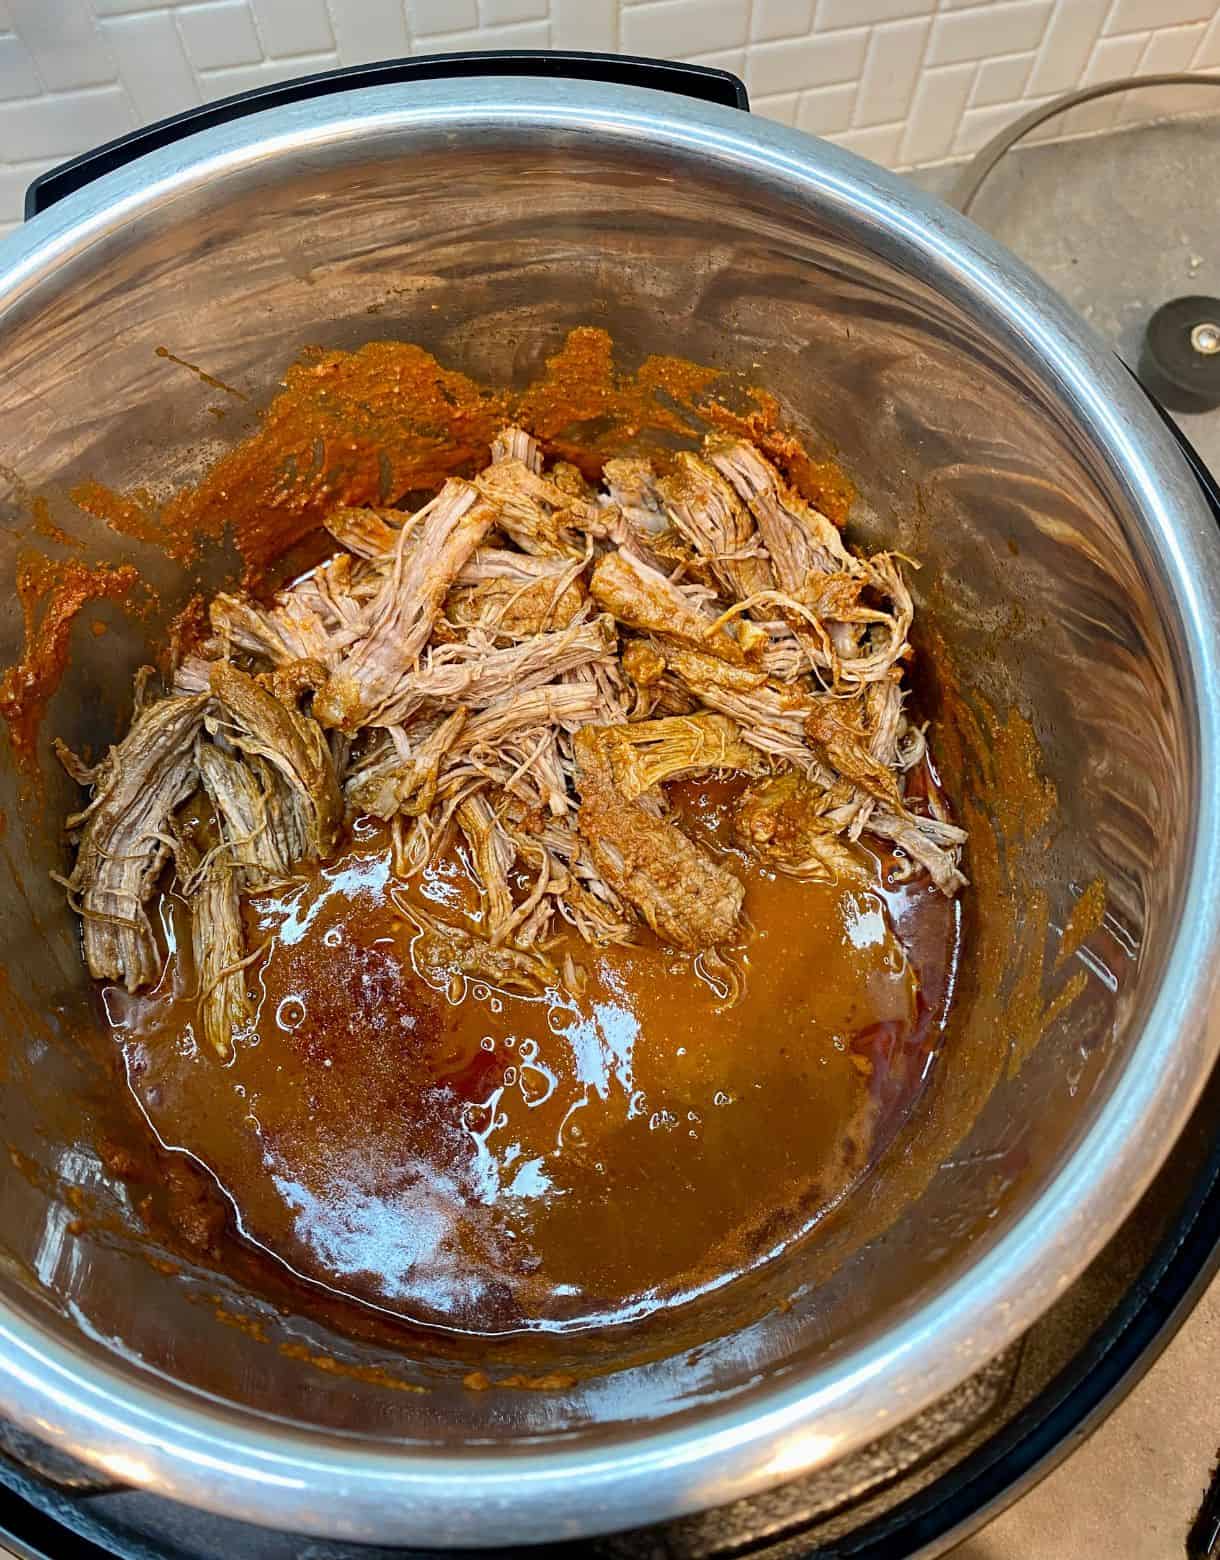 Slow cooker with shredded beef and sauce for Pulled Beef Tacos.